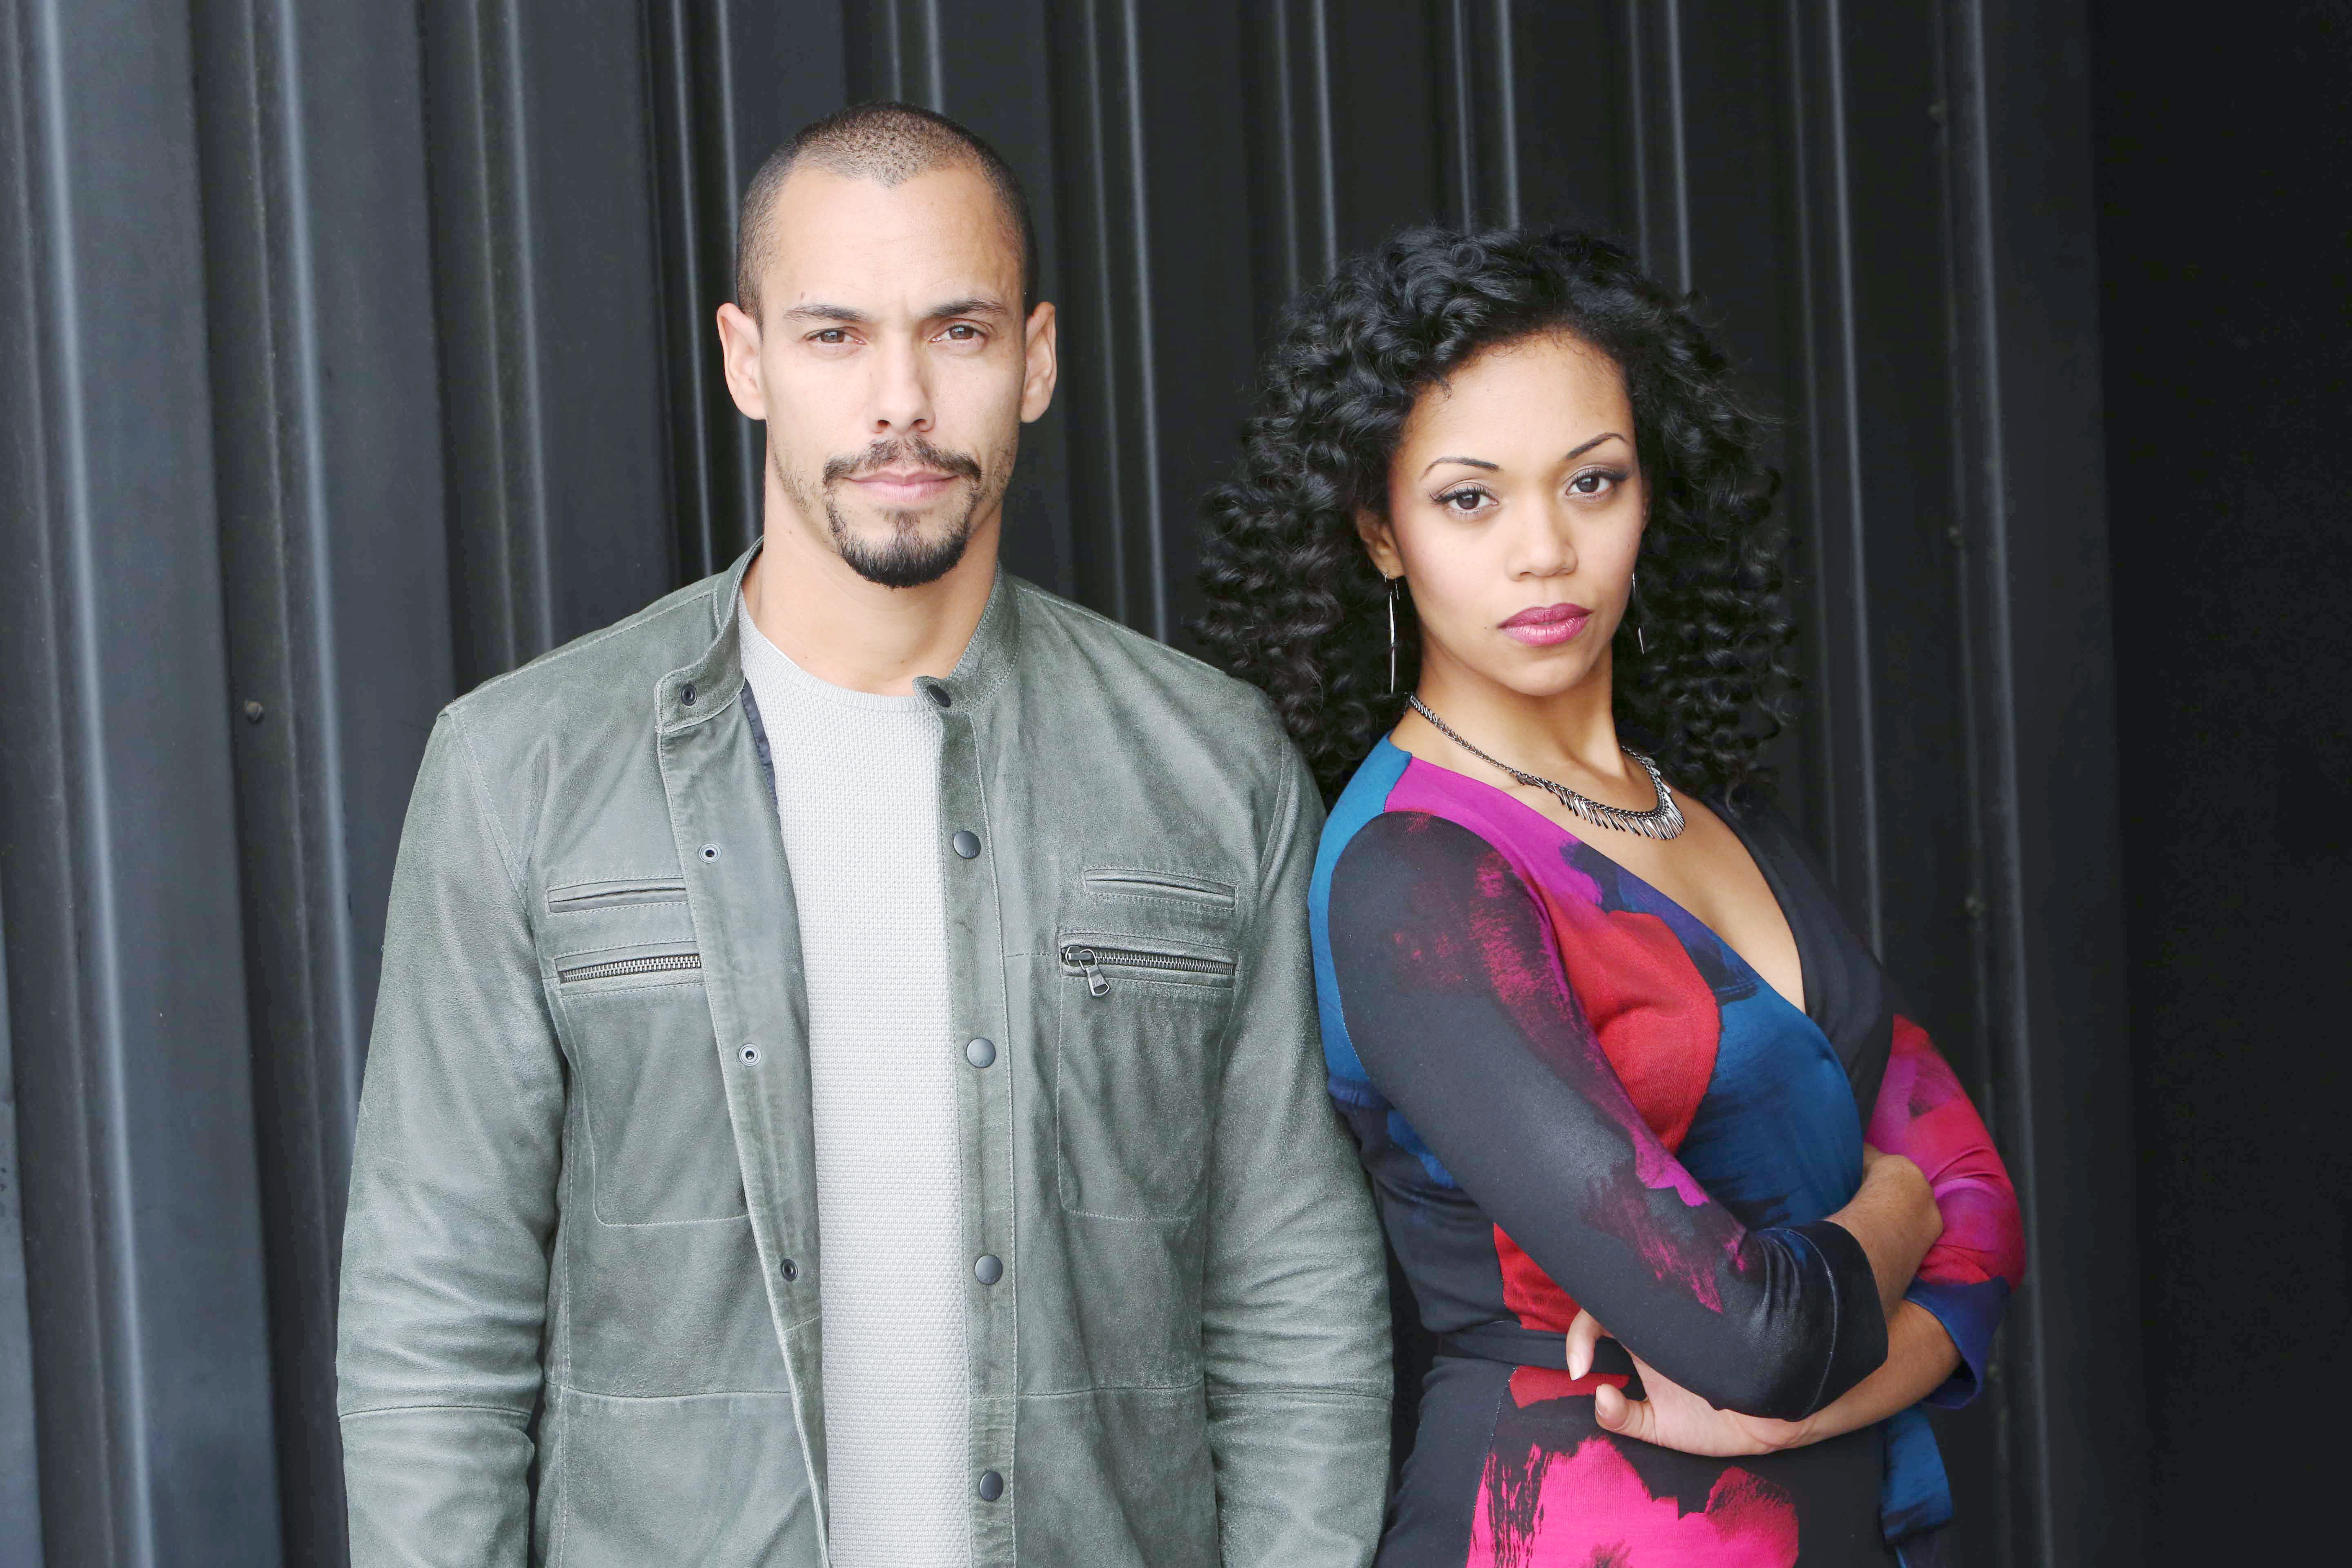 Bryton James, Mishael Morgan "The Young and the Restless" Set  CBS television City Los Angeles 01/10/17 © Howard Wise/jpistudios.com 310-657-9661